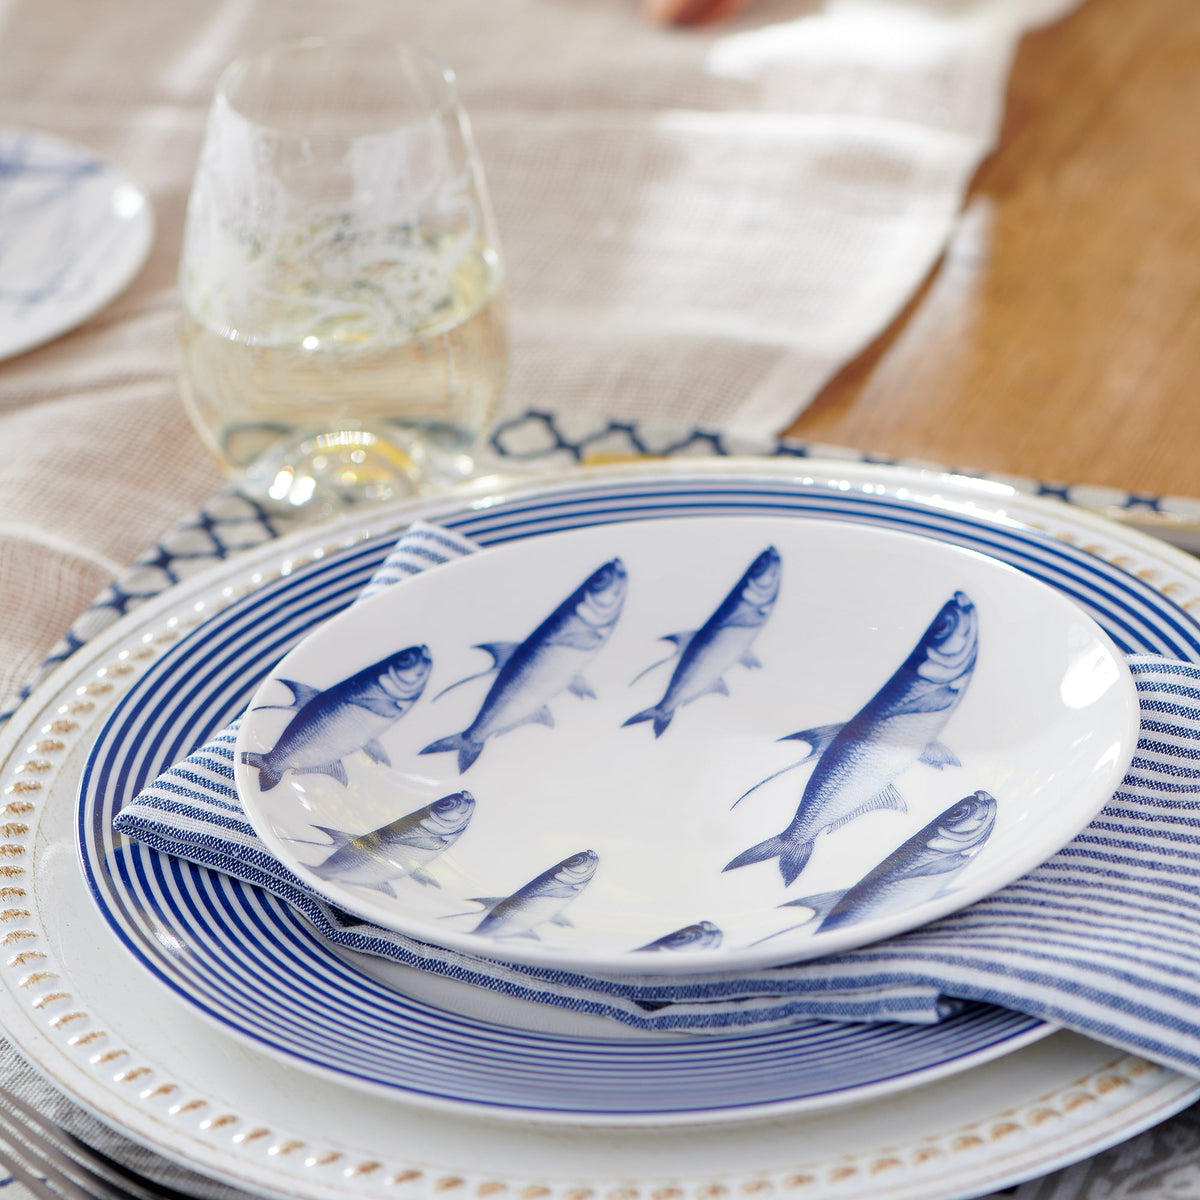 An School of Fish Coupe Salad Plate featuring a school of fish in blue and white design, made by Caskata Artisanal Home.